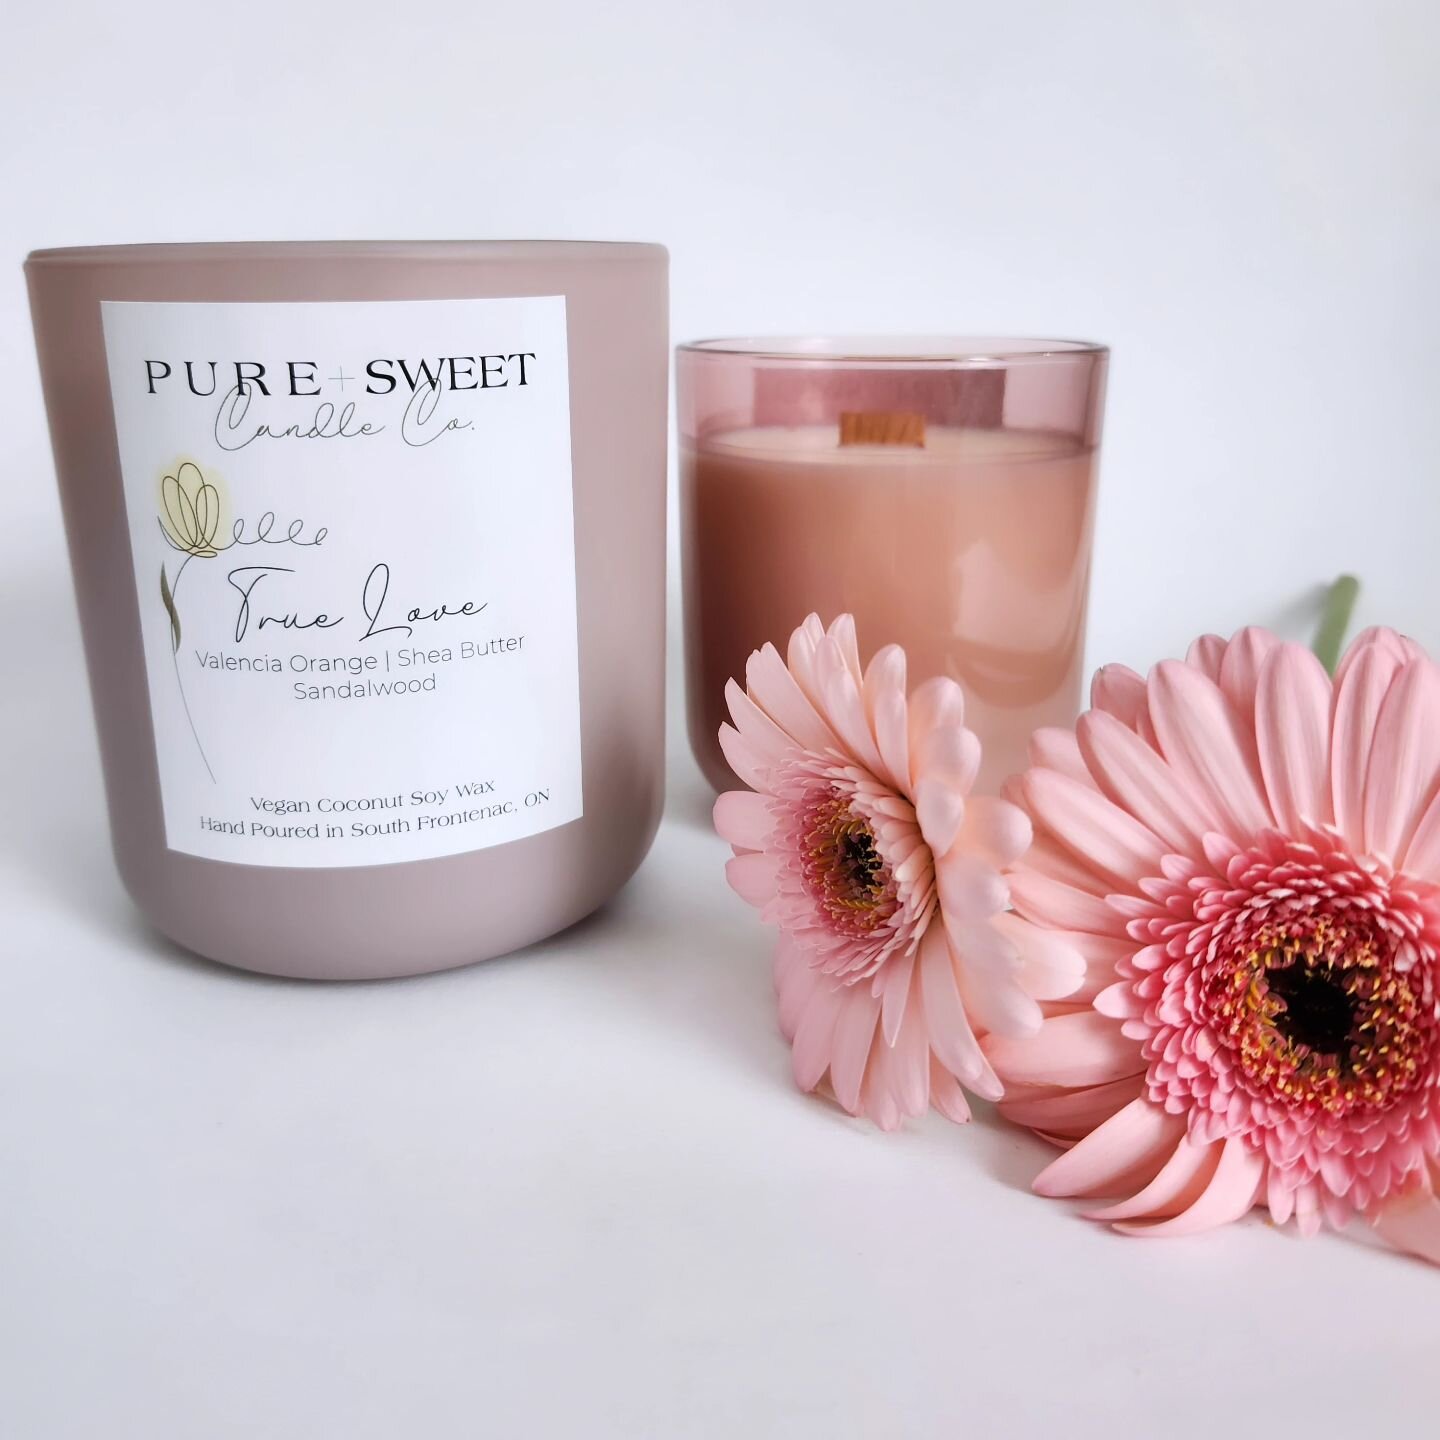 💝Giveaway💝

Valentines Giveaway with Pure + Sweet Candle Co

💝Tag your friend, your valentine, or true love
Each Tag = 1 entry

💝Make sure to follow @puresweetcandleco

💝Like and share this post for extra entries

The winner receives a 12oz True